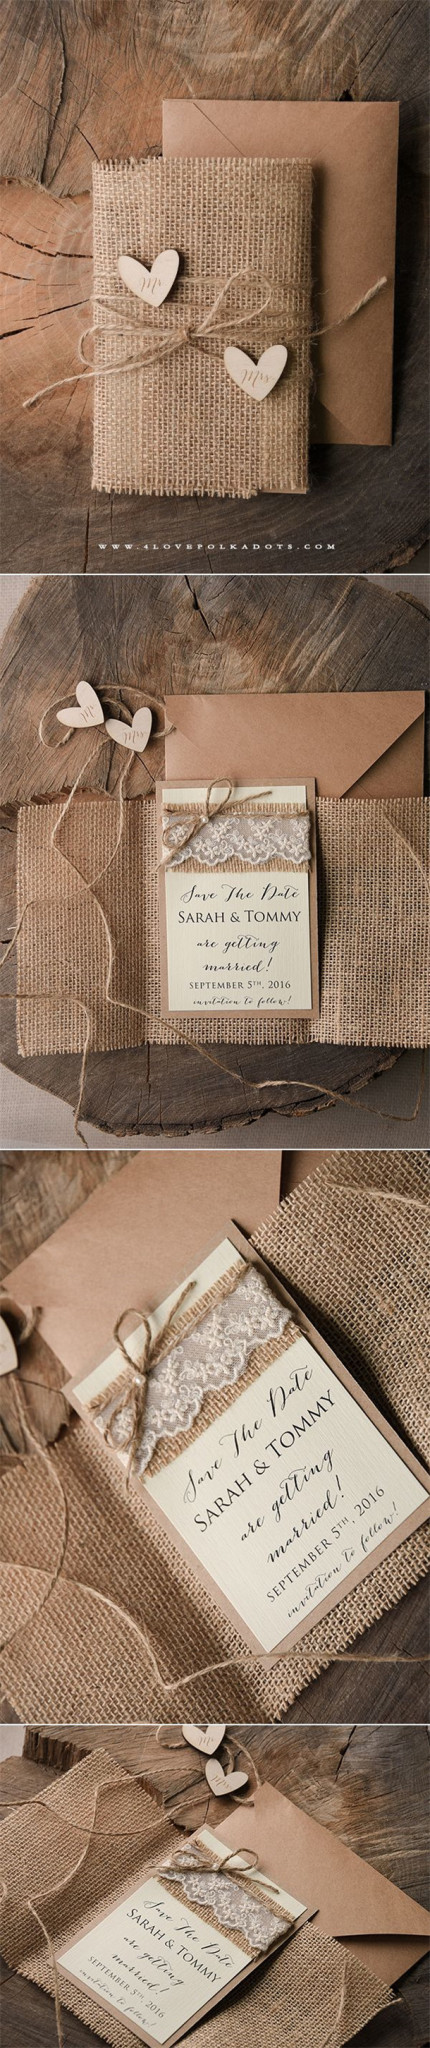 Burlap Wedding invitations and Save the Date Card with wooden tags